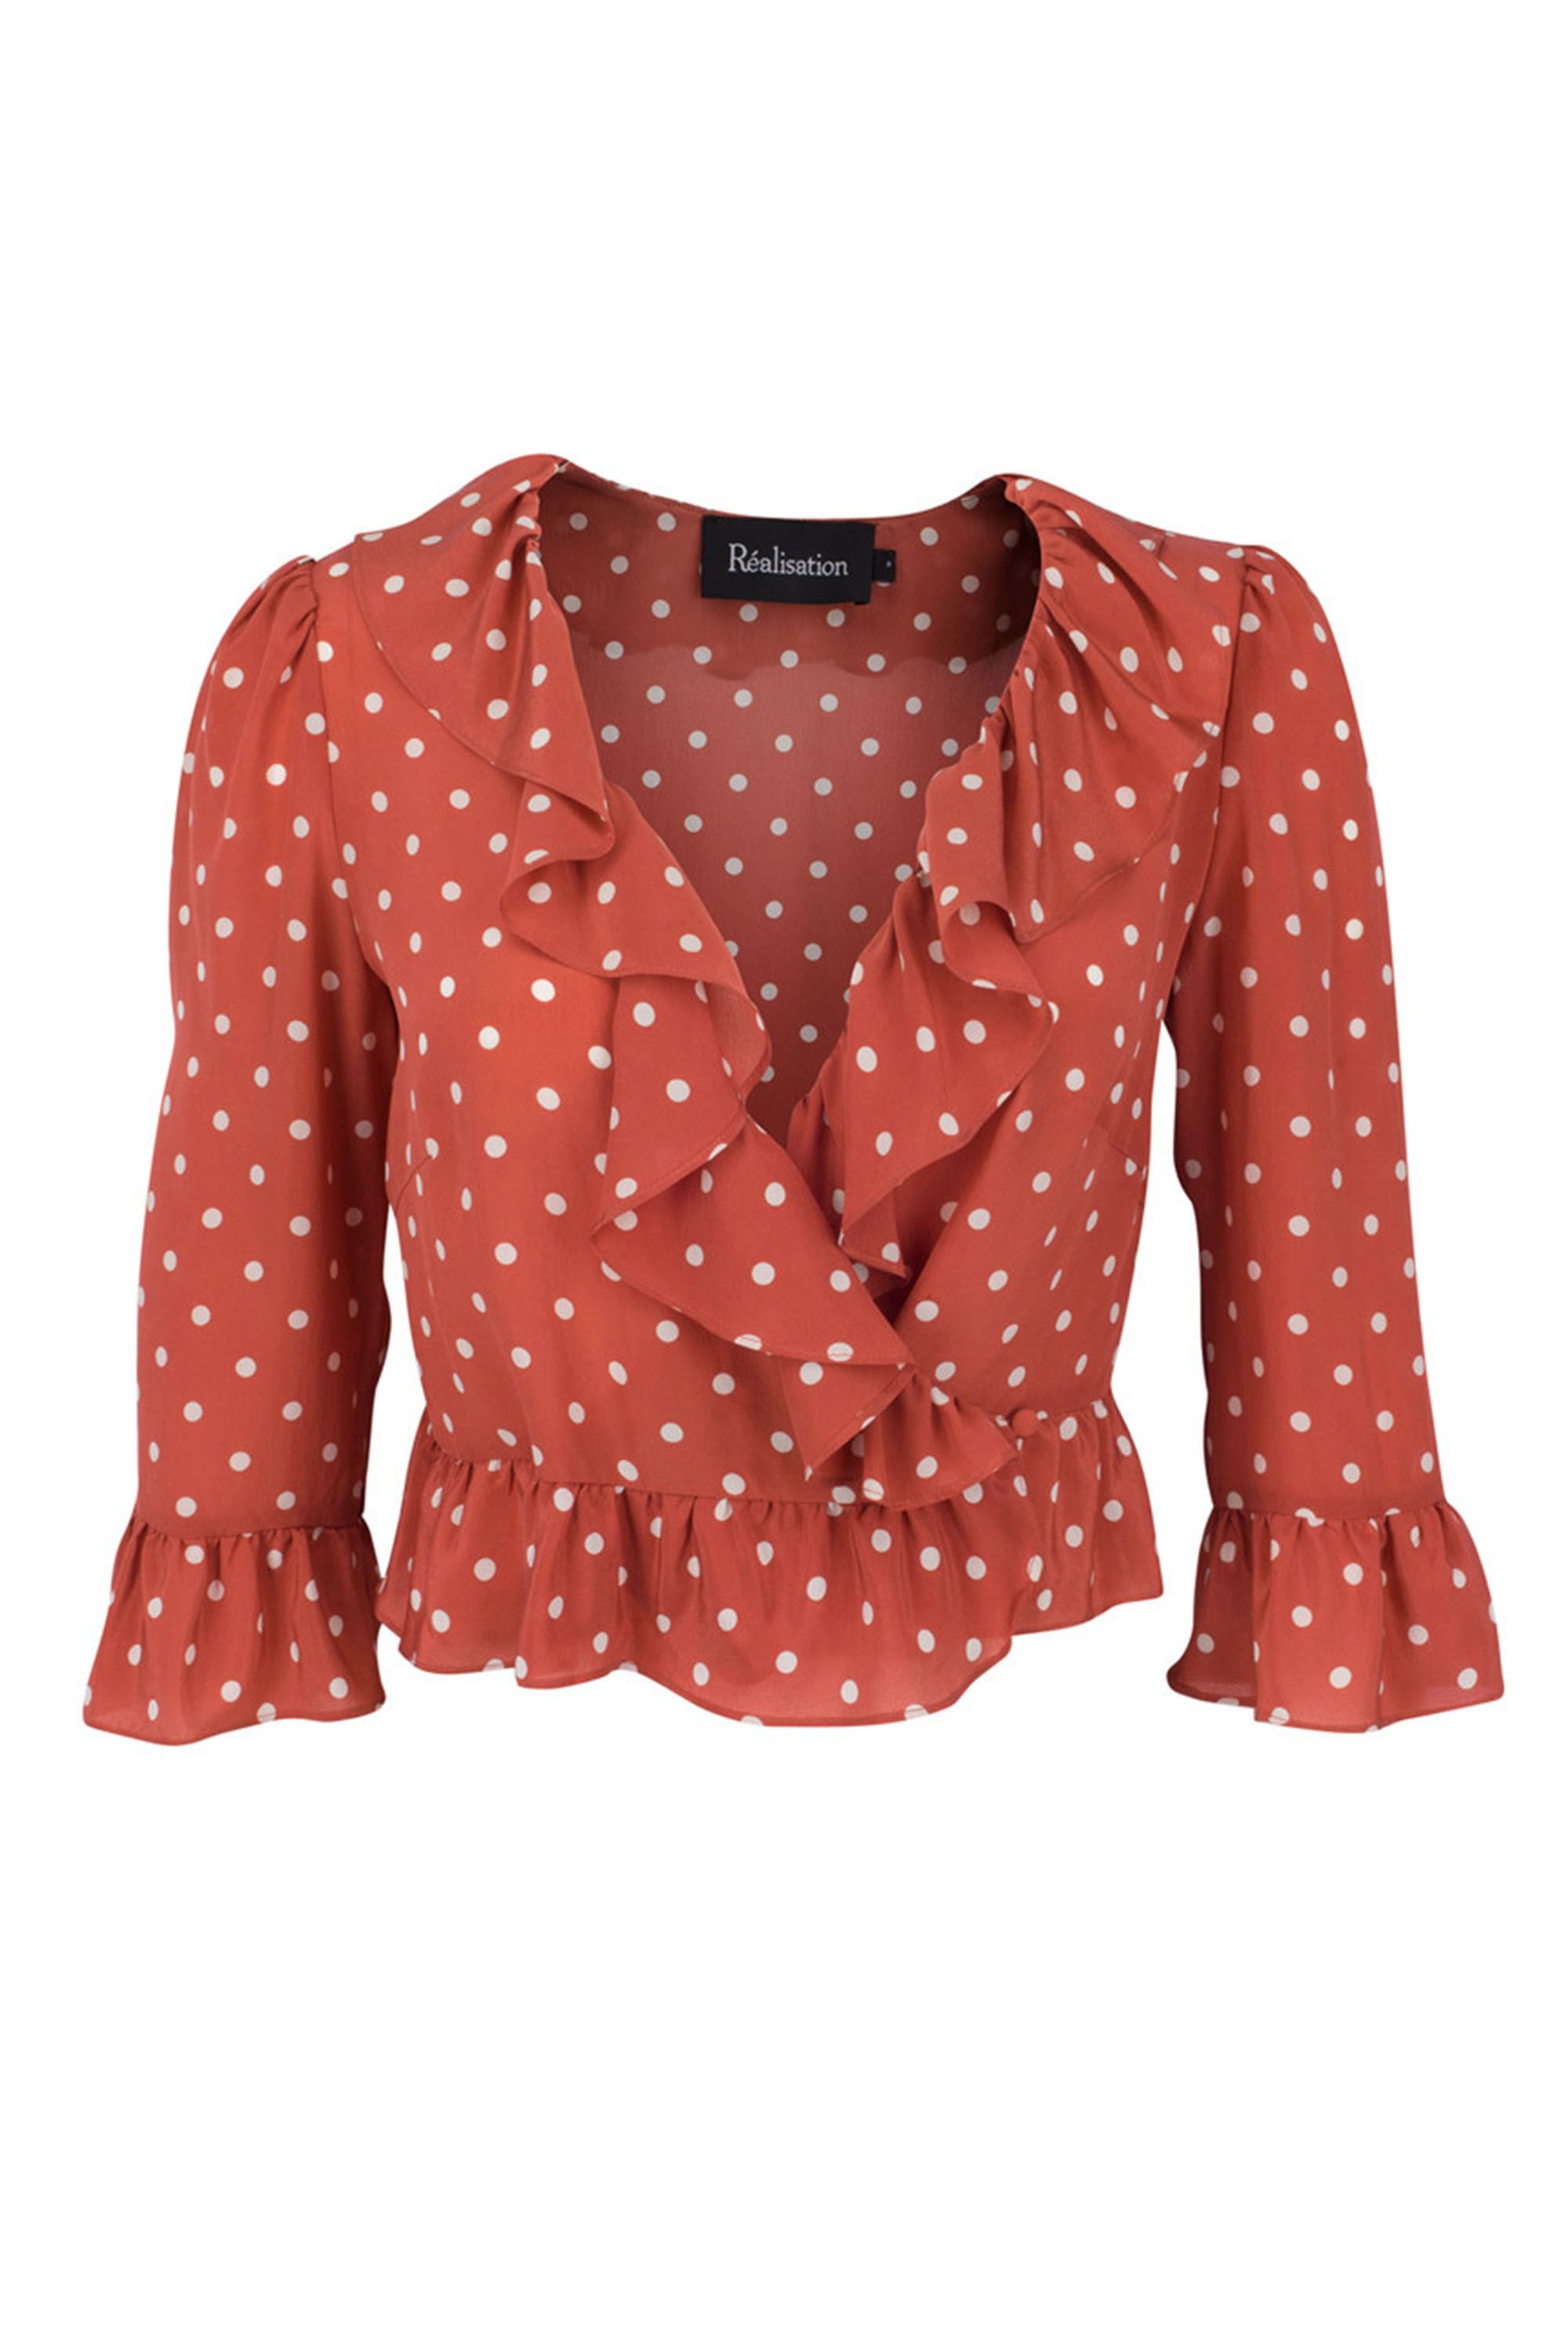 5 Cute Night Tops Women - Blouses to Wear on a First